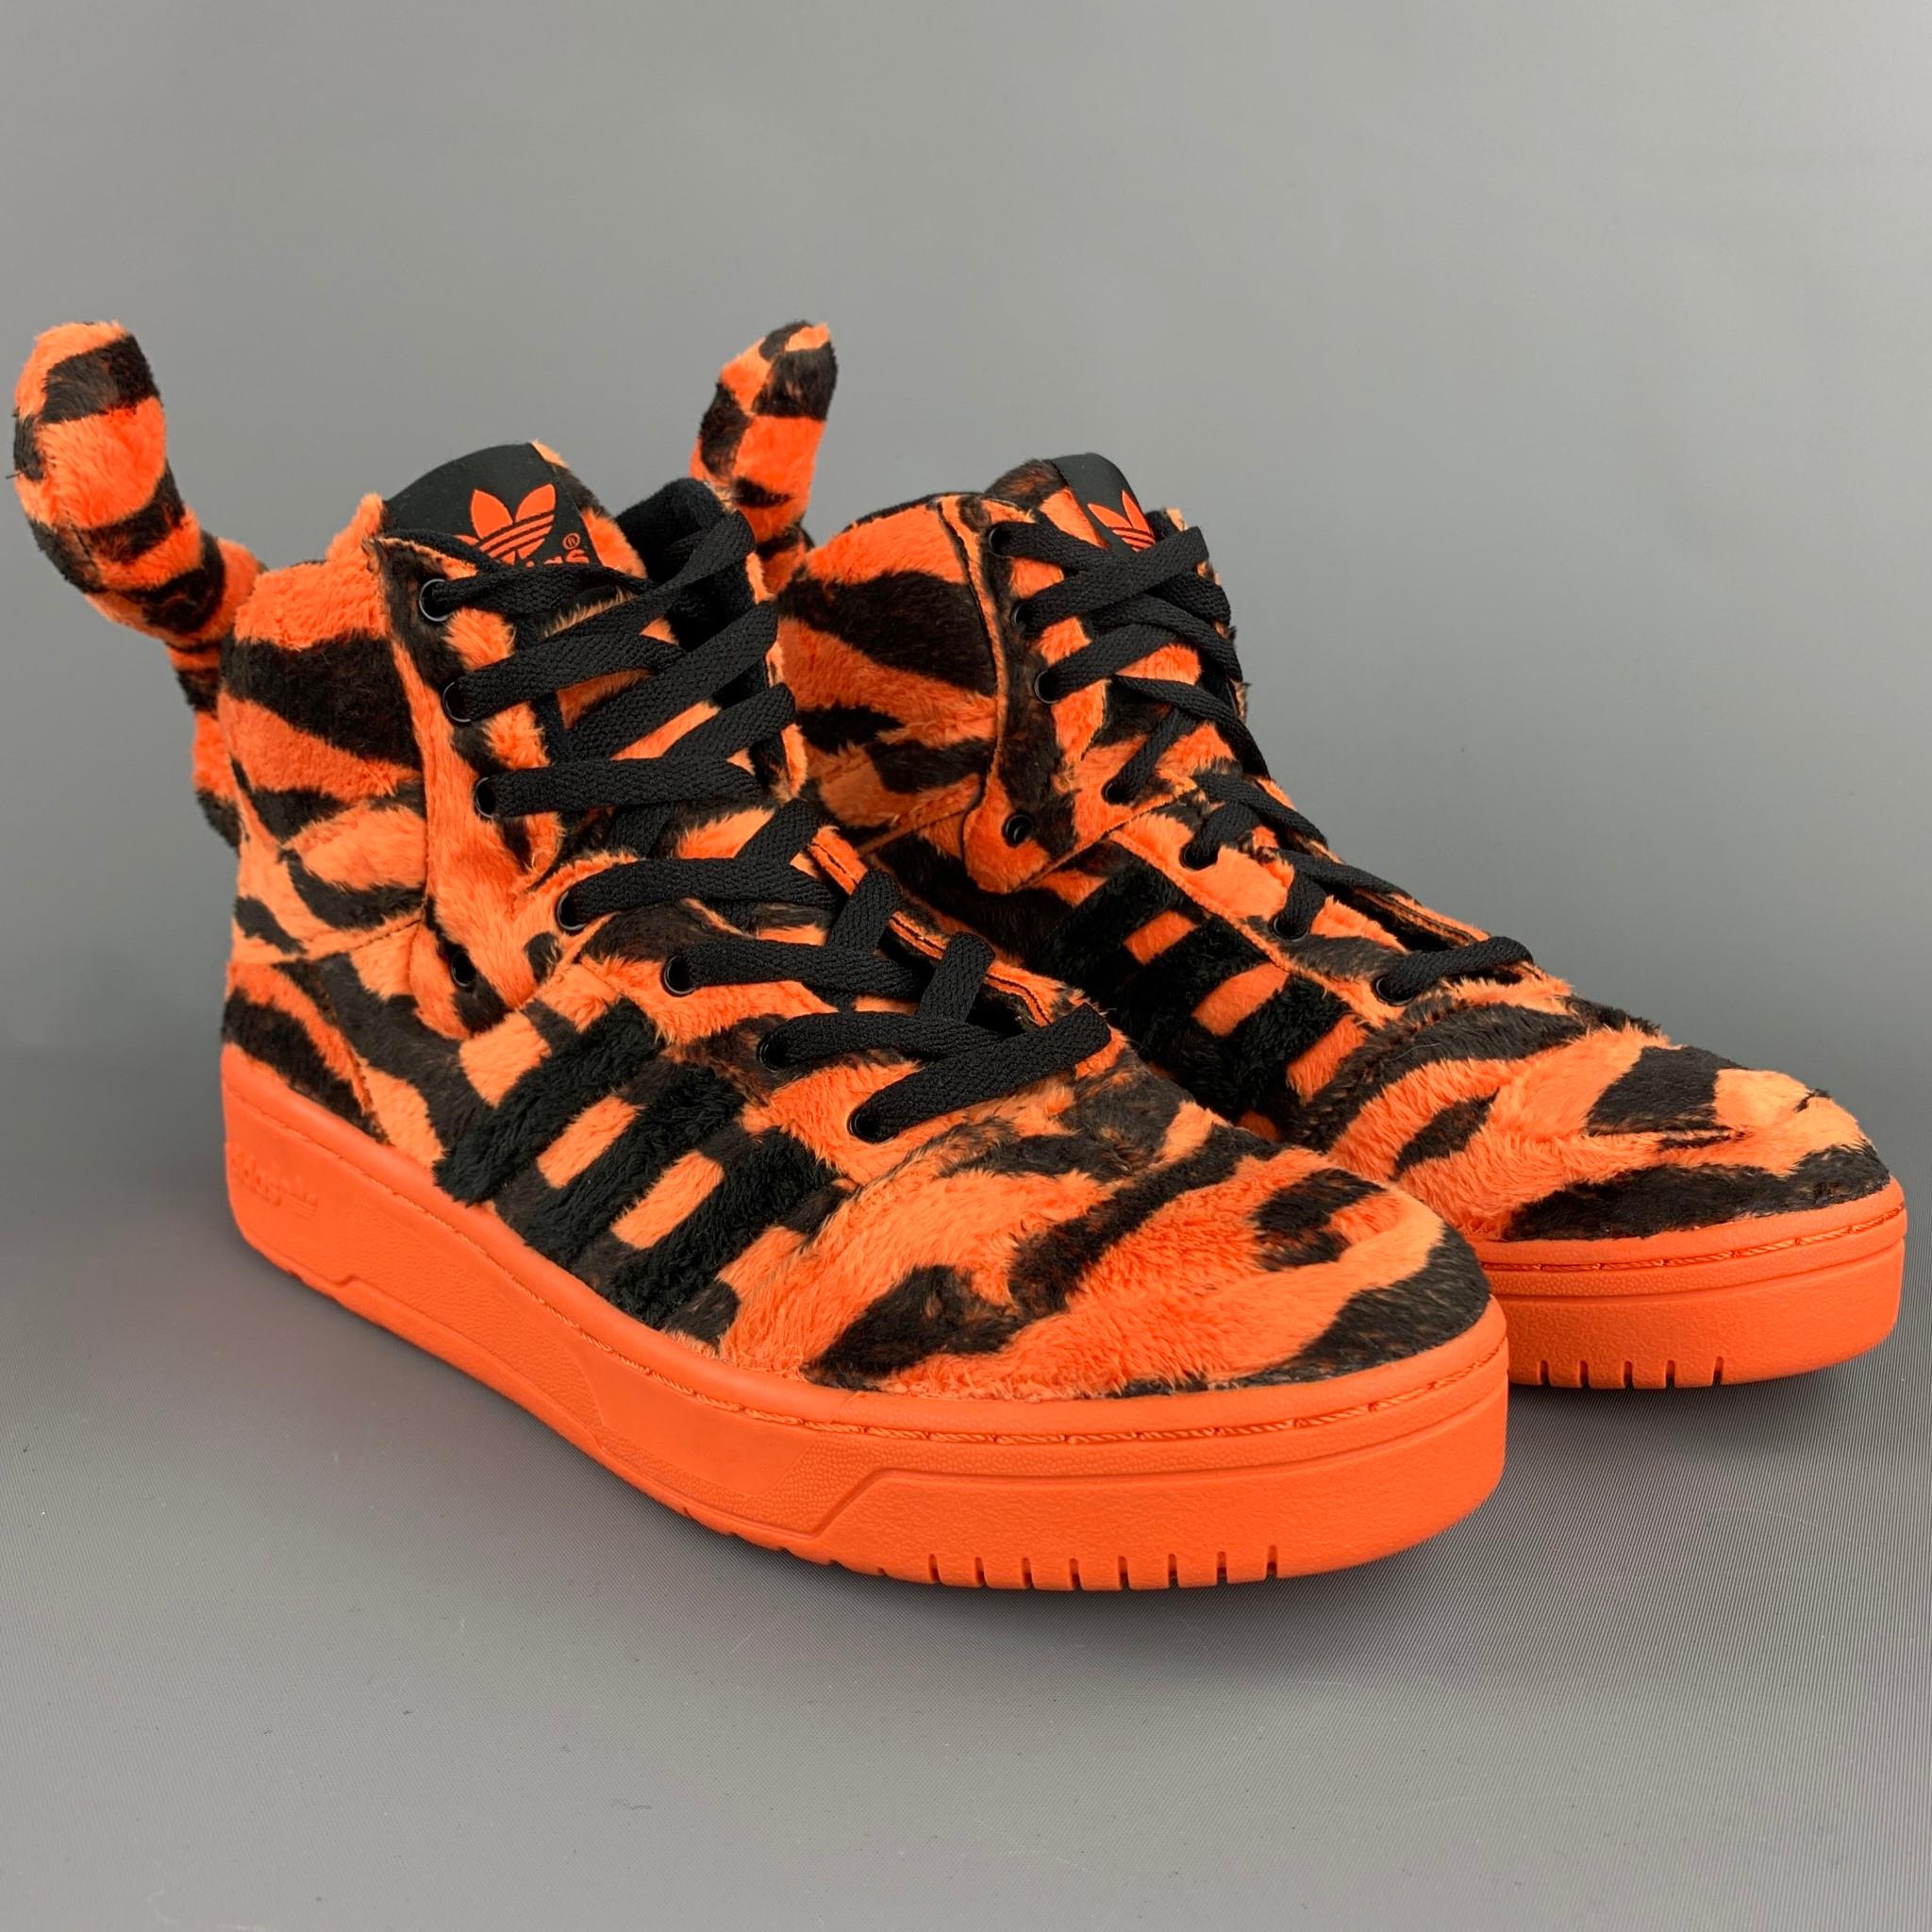 JEREMY SCOTT x ADIDAS sneakers comes orange & black tiger print faux fur featuring a high top style, tail detail, rubber sole, and a lace up closure.

New with box.
Marked: 9

Outsole:  

11.5 in. x 4 in. 